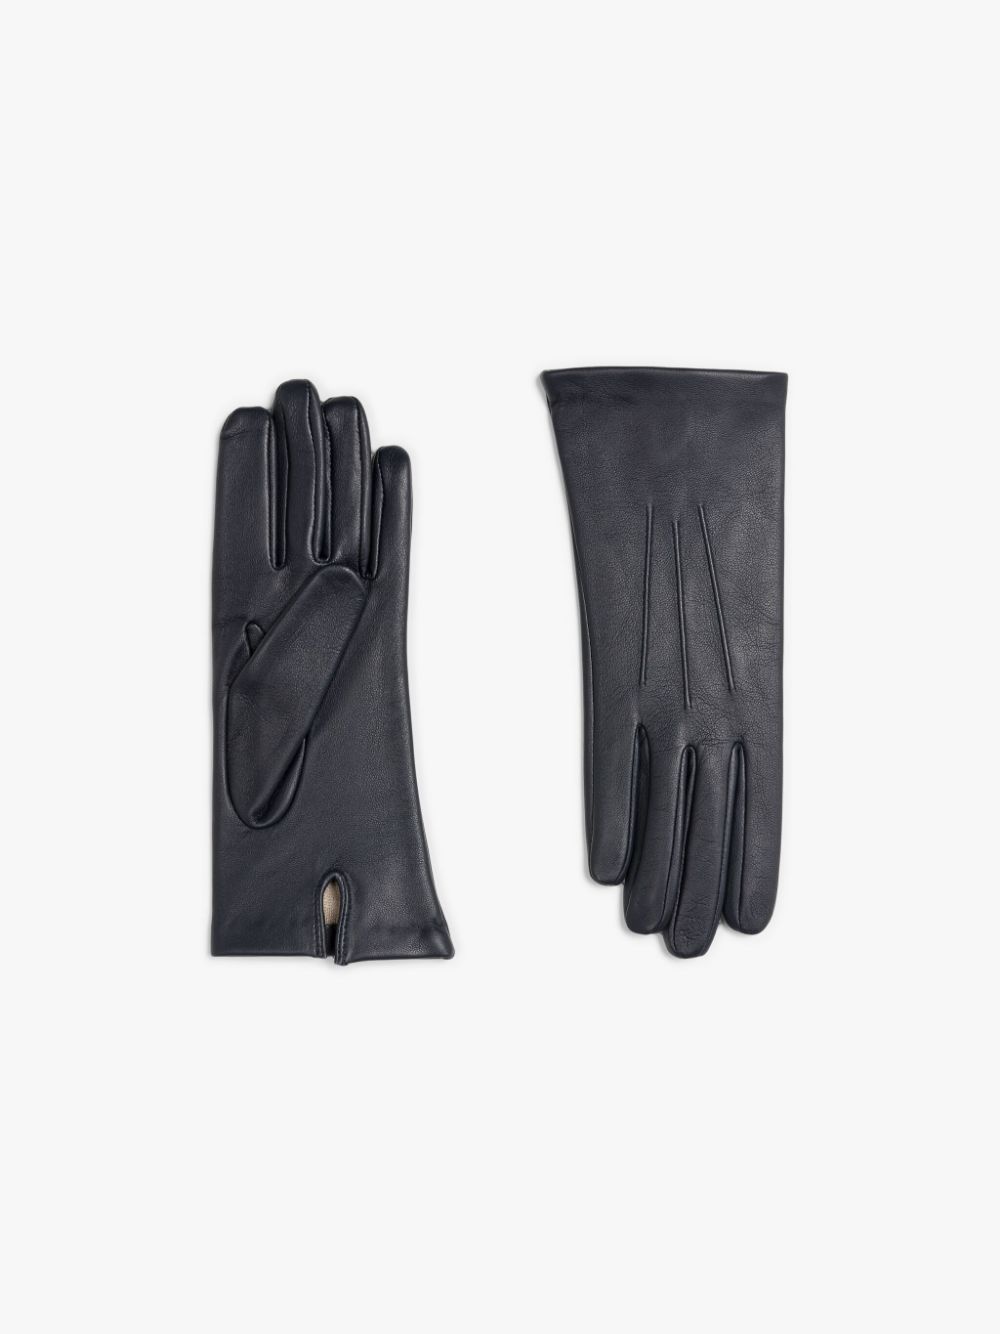 NAVY LEATHER GLOVES - 1